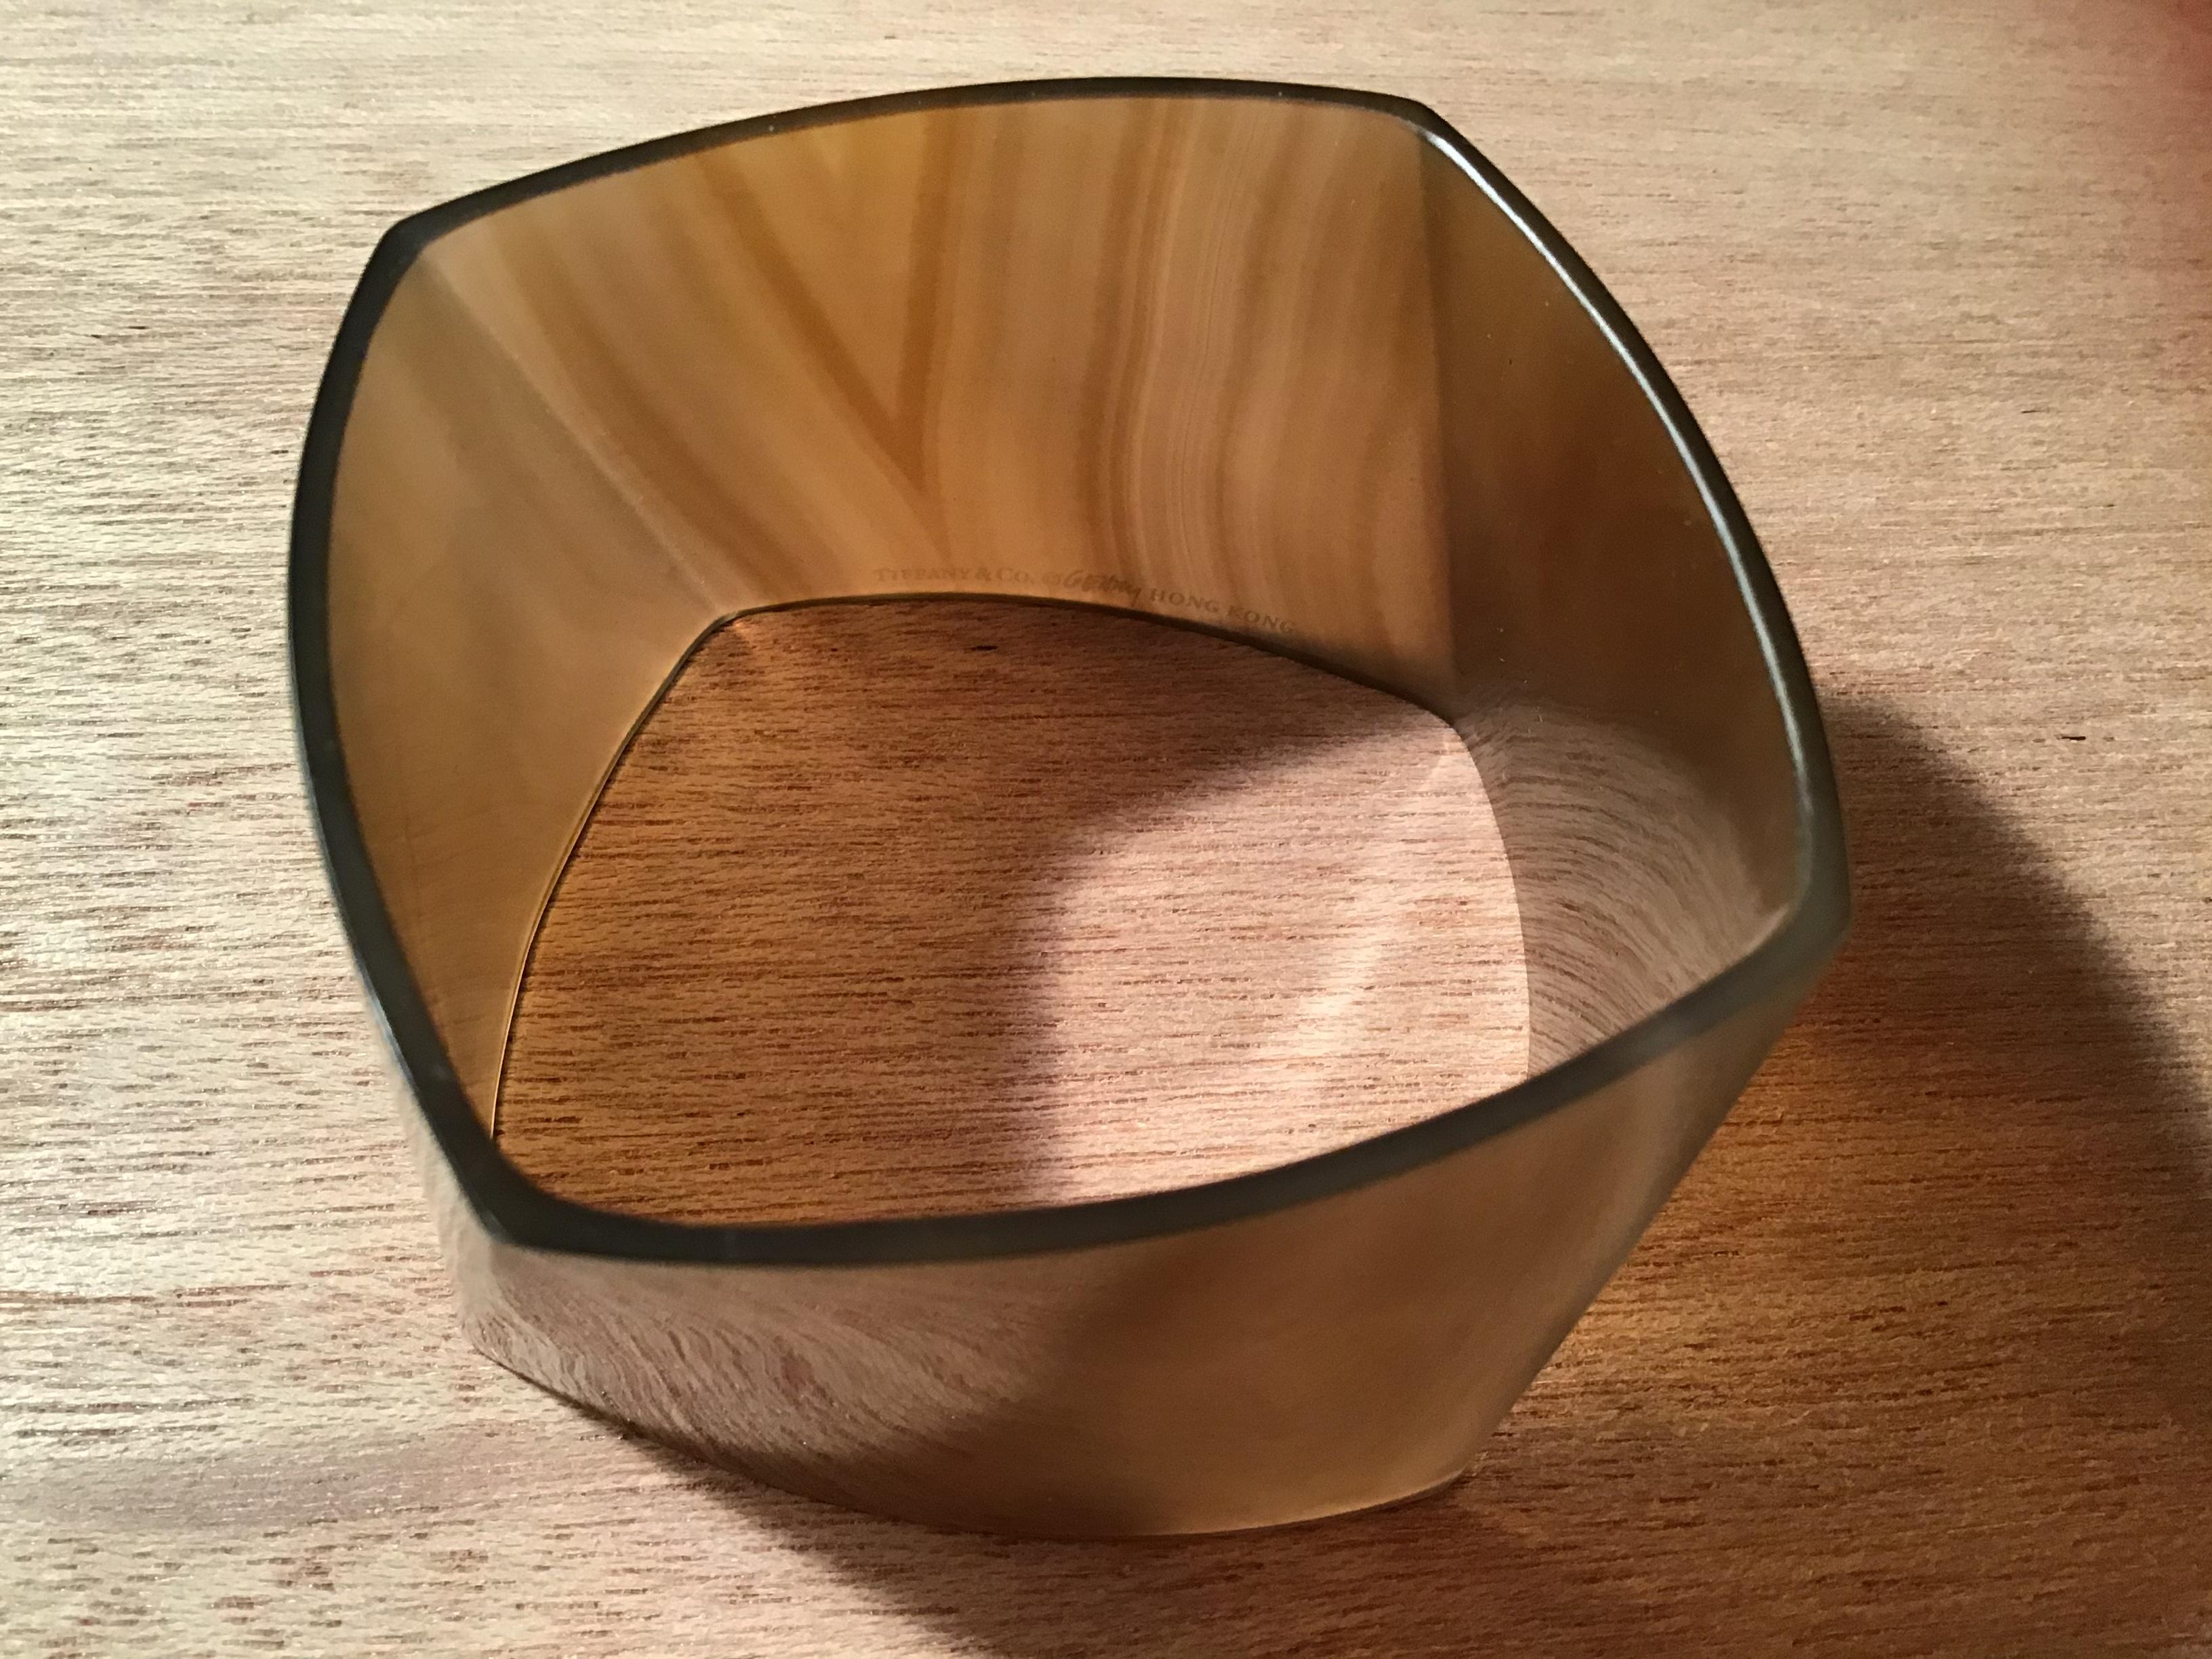 Hong Kong Frank Gehry for Tiffany & Co Agate Torque Bangle Bracelet, Rare and Retired For Sale